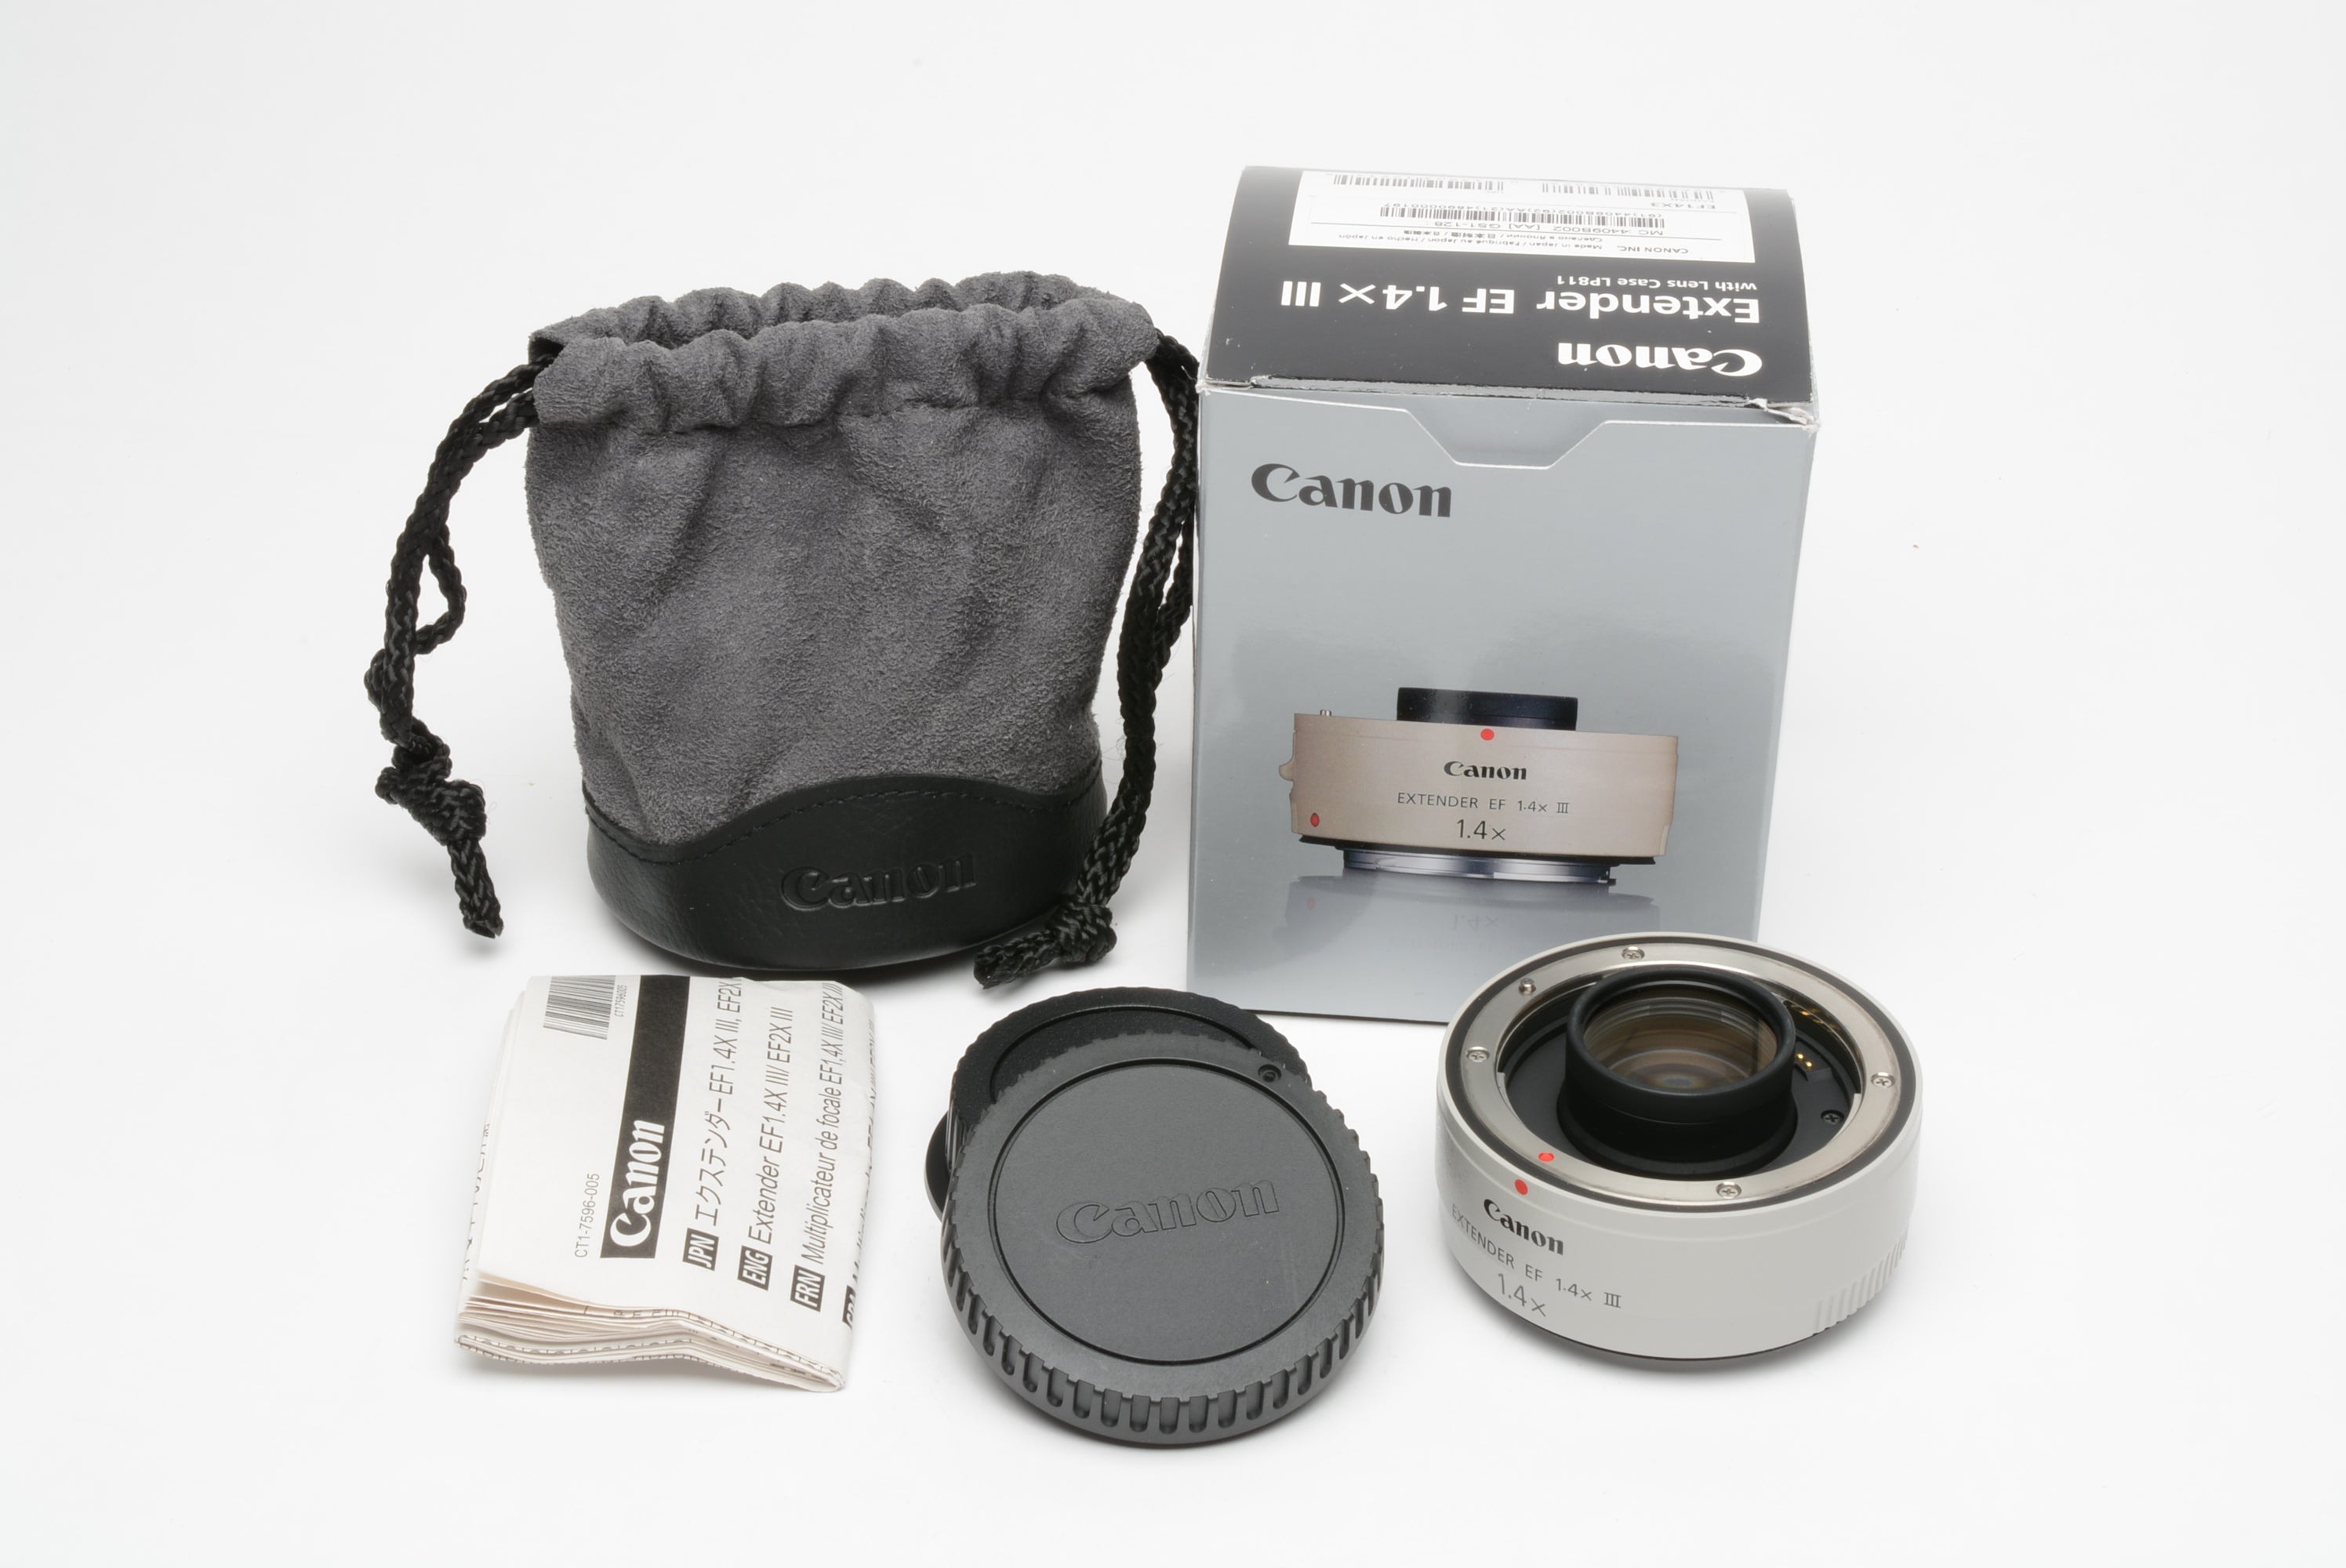 Canon Extender EF 1.4X III Teleconverter w/caps, pouch, boxed